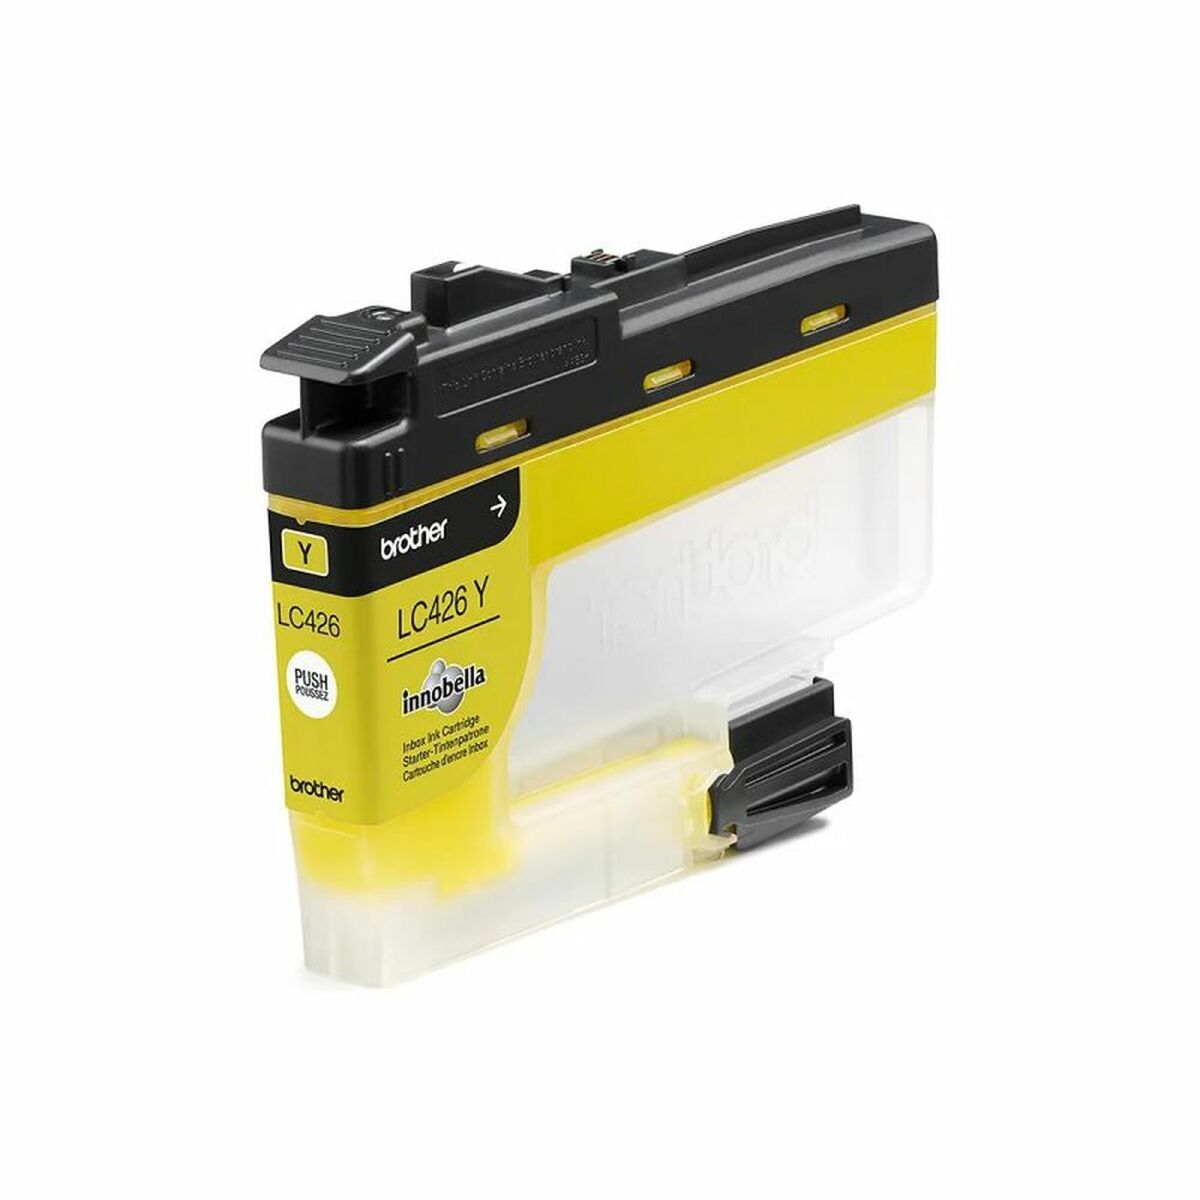 Original Ink Cartridge Brother LC426, Brother, Computing, Printers and accessories, original-ink-cartridge-brother-lc426, Brand_Brother, category-reference-2609, category-reference-2642, category-reference-2874, category-reference-t-19685, category-reference-t-19911, category-reference-t-21377, category-reference-t-25688, Colour_Black, Colour_Cyan, Colour_Yellow, Condition_NEW, office, Price_20 - 50, Teleworking, vuelta al cole, RiotNook